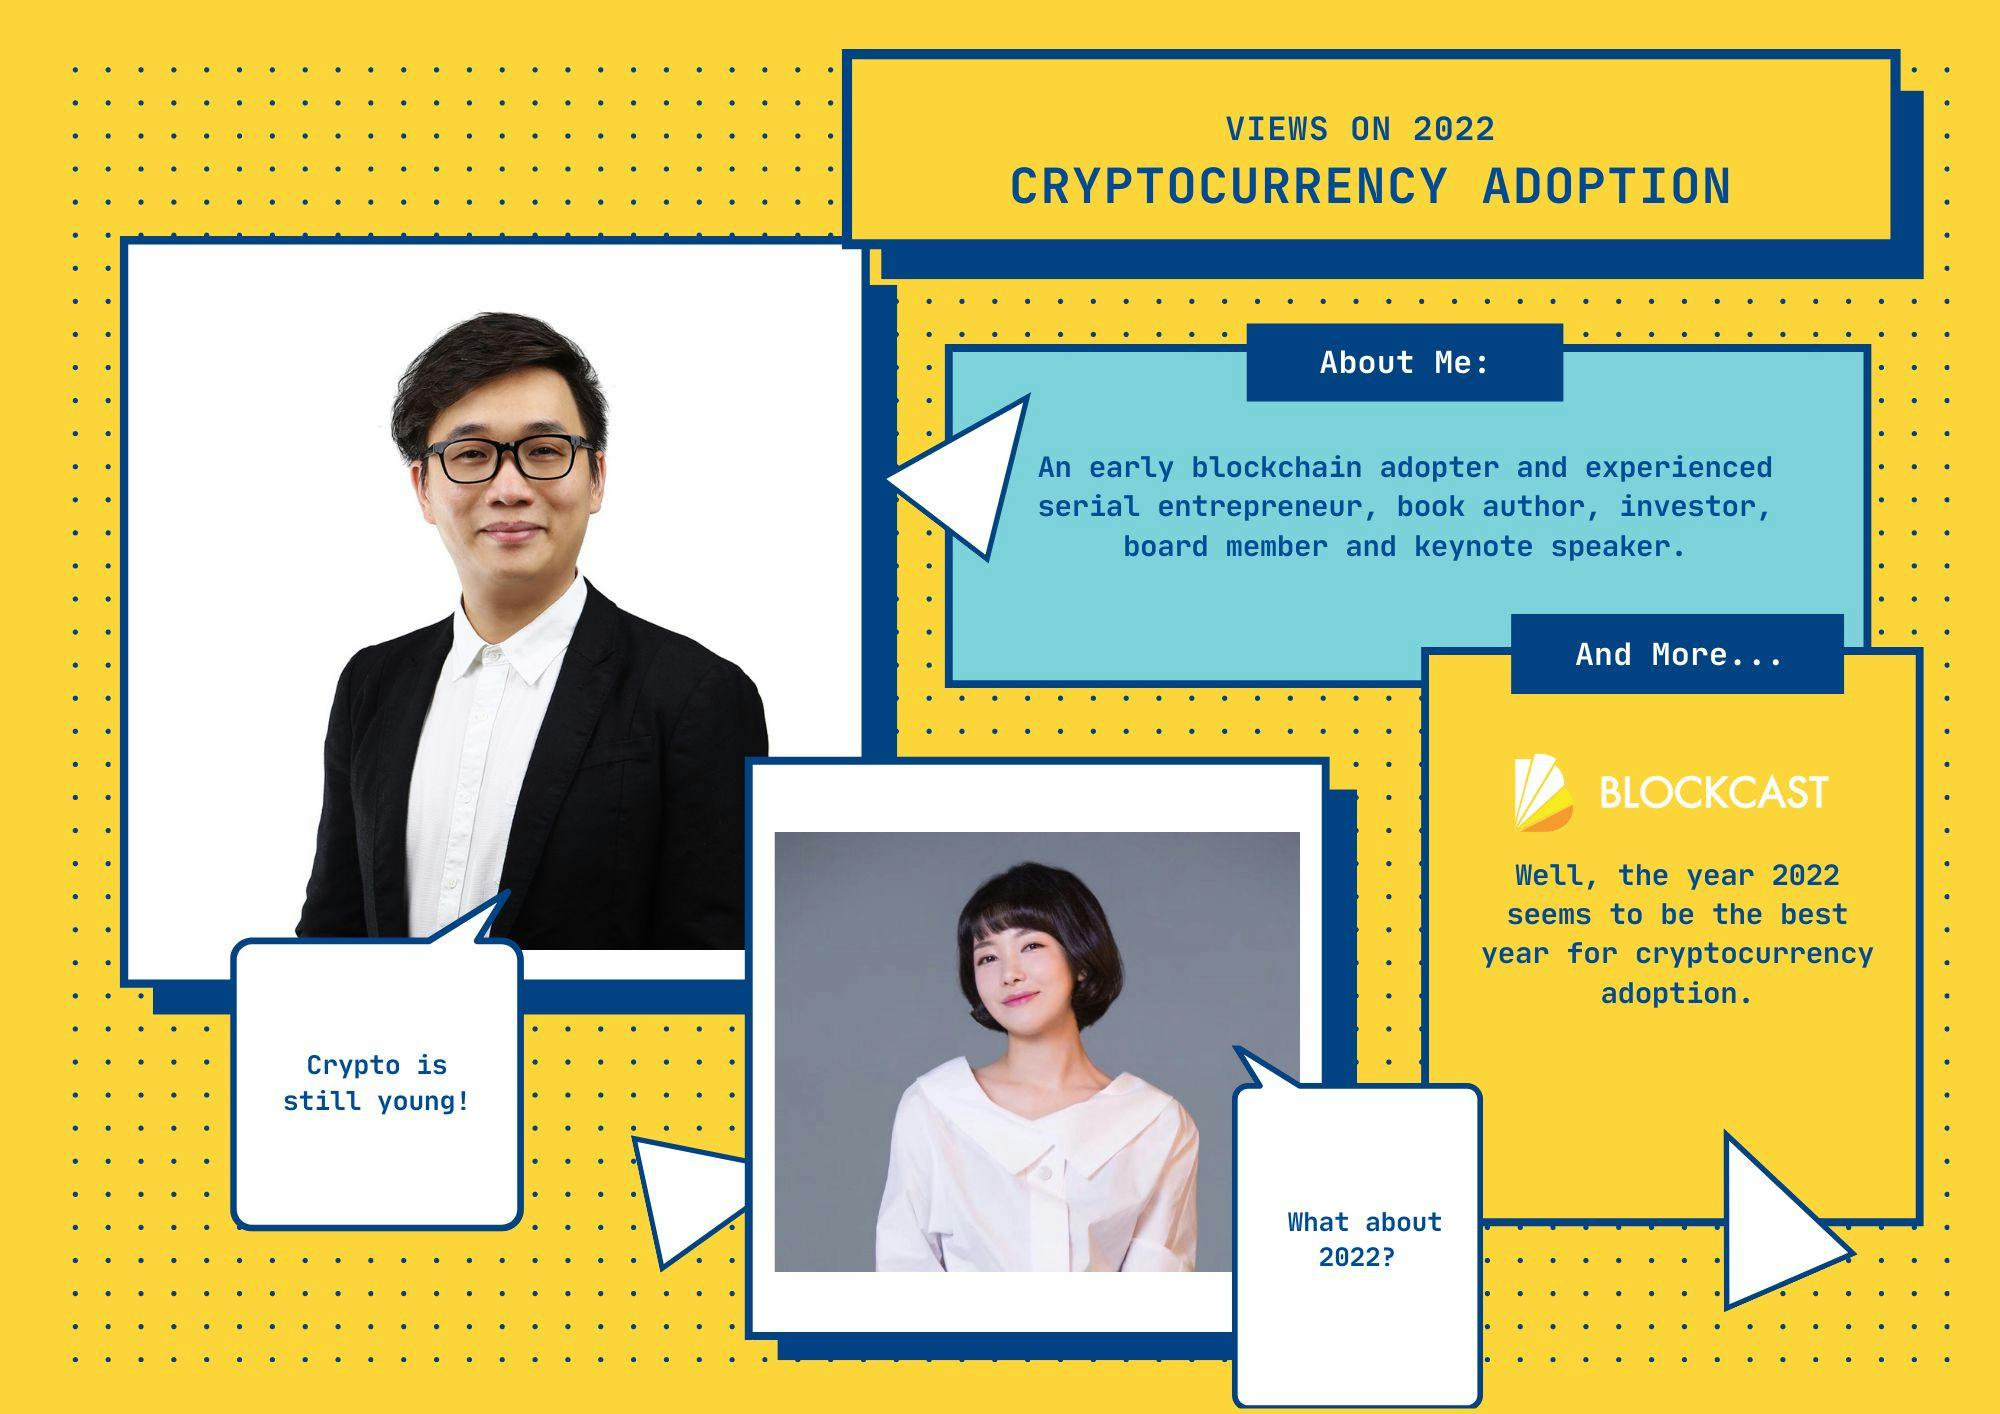 featured image - Interview with Anndy Lian: Views on 2022 Cryptocurrency Adoption - What Is Coming Next